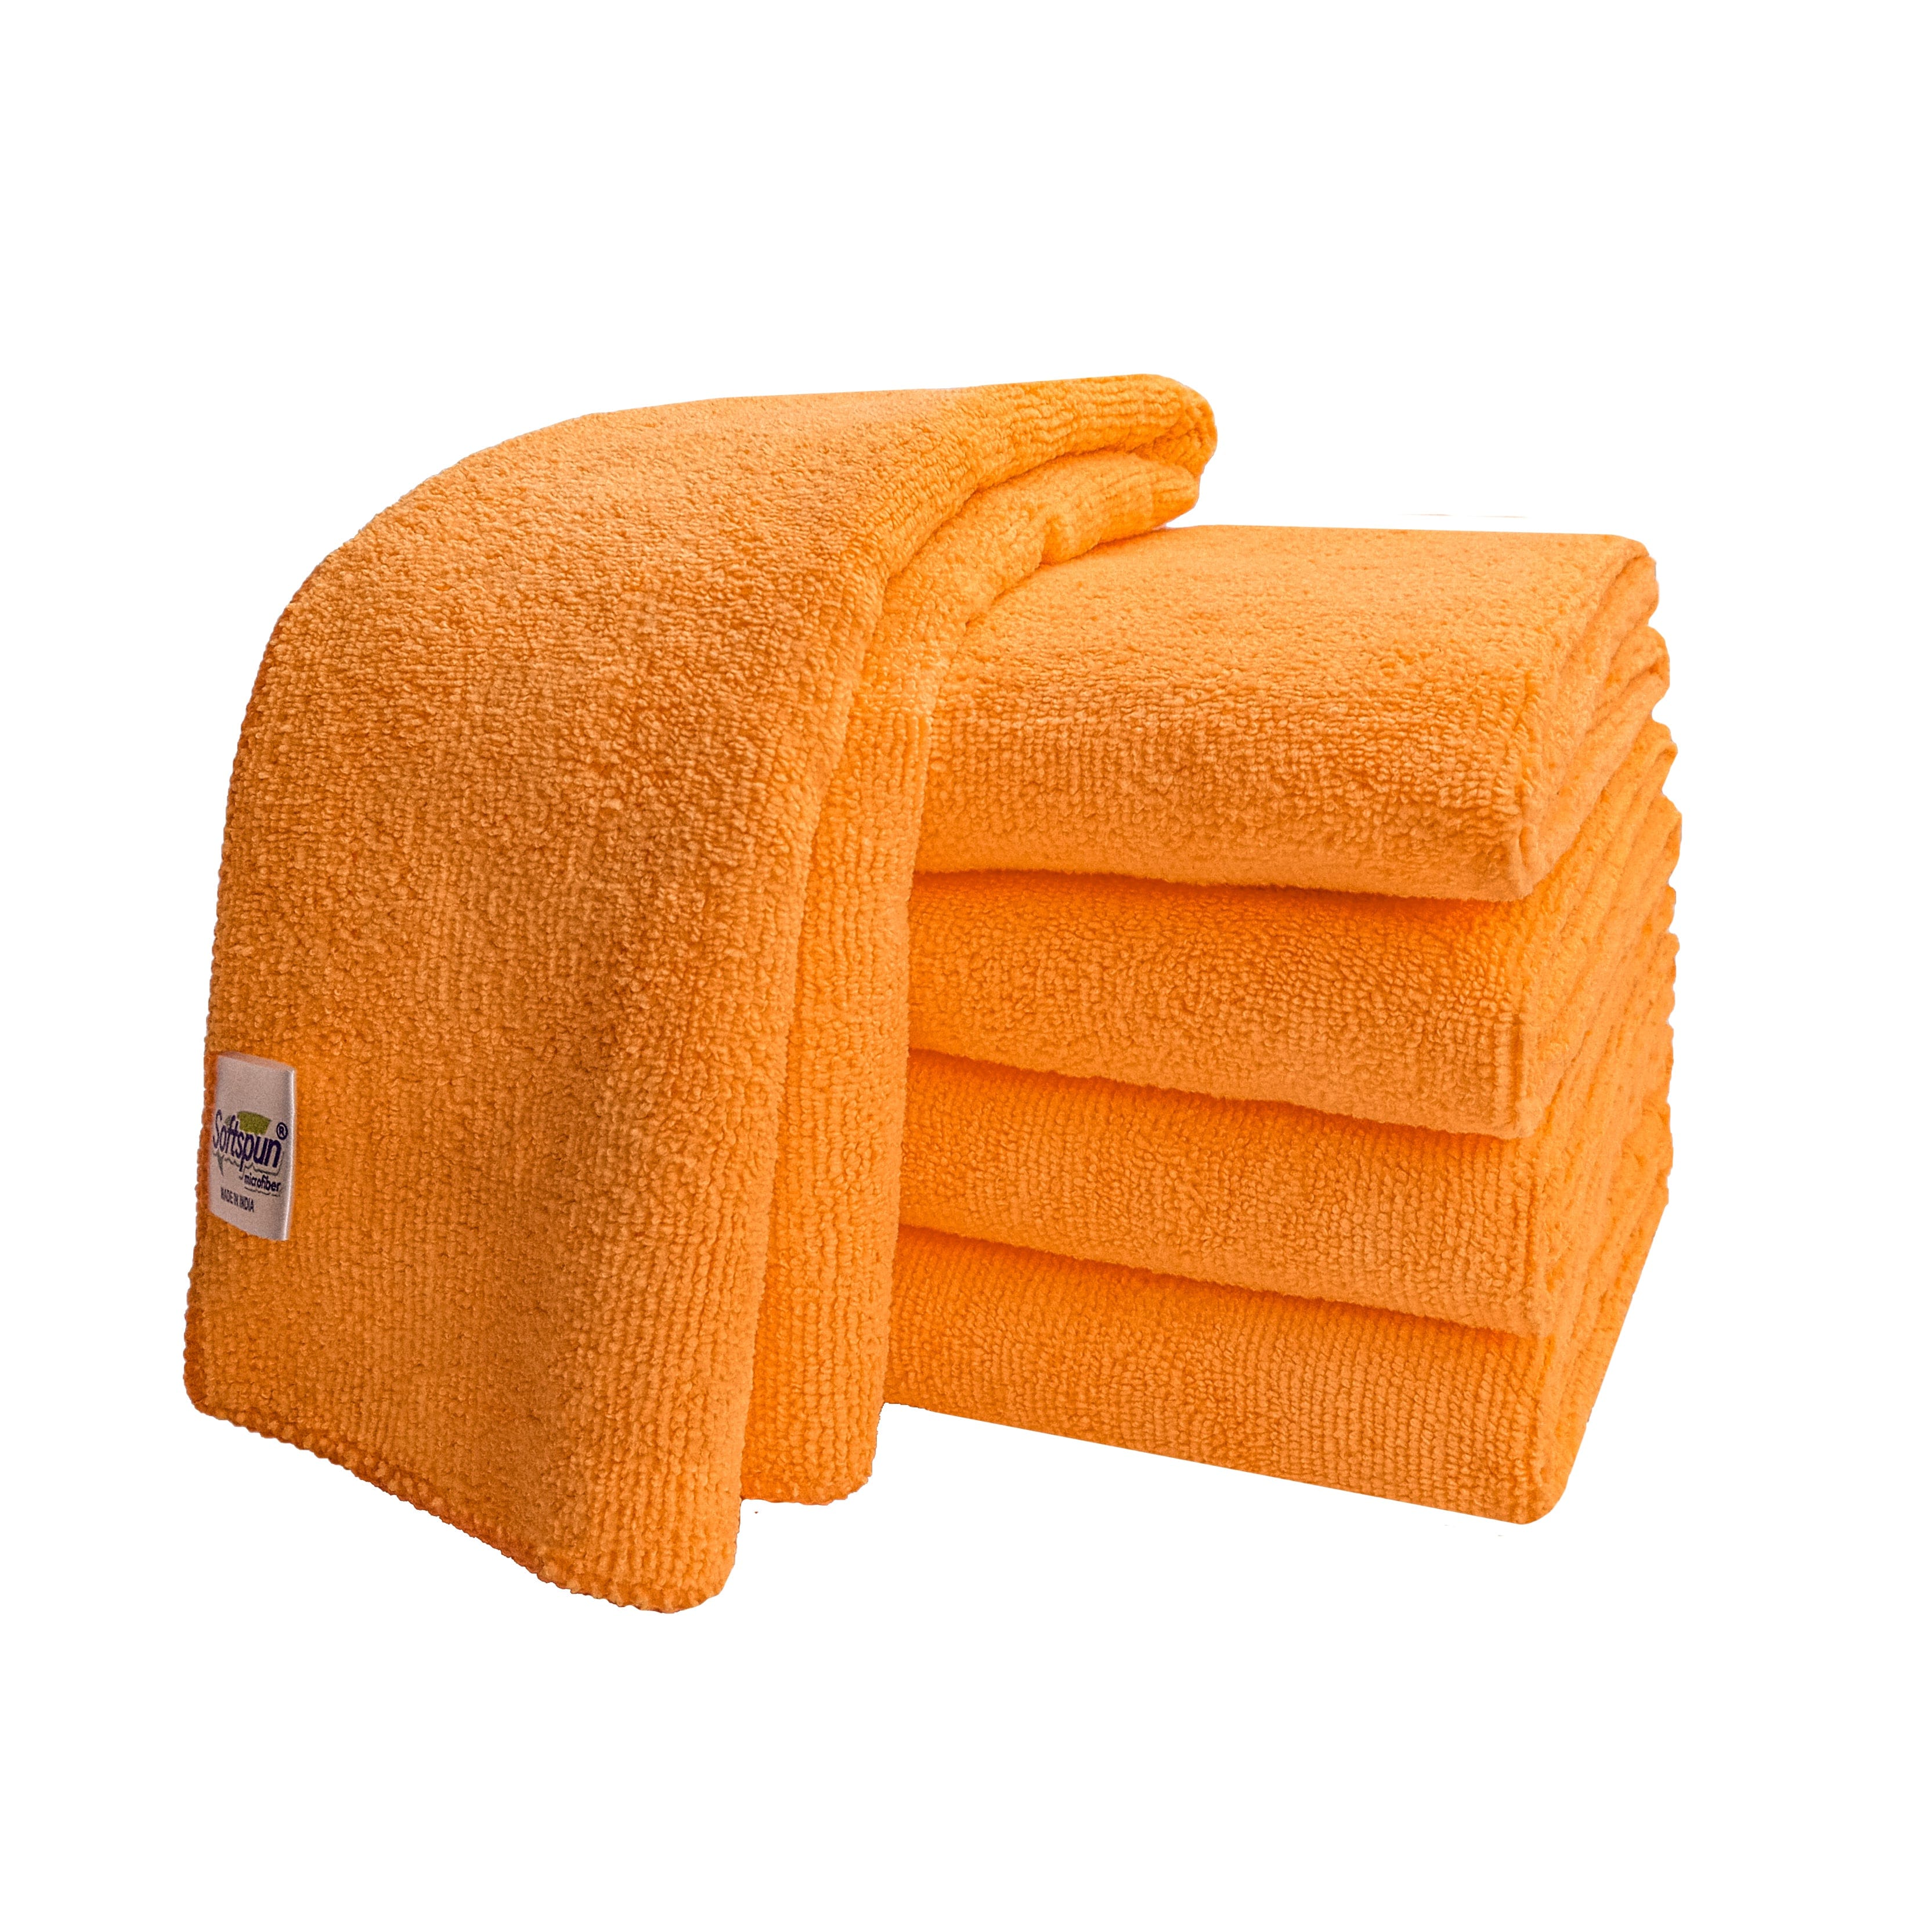 SOFTSPUN Microfiber Home & Kitchen Cleaning and Dusting Cloth 340 GSM, Highly Absorbent, Lint and Streak Free, Multi-Purpose Wash Cloth for Kitchen.